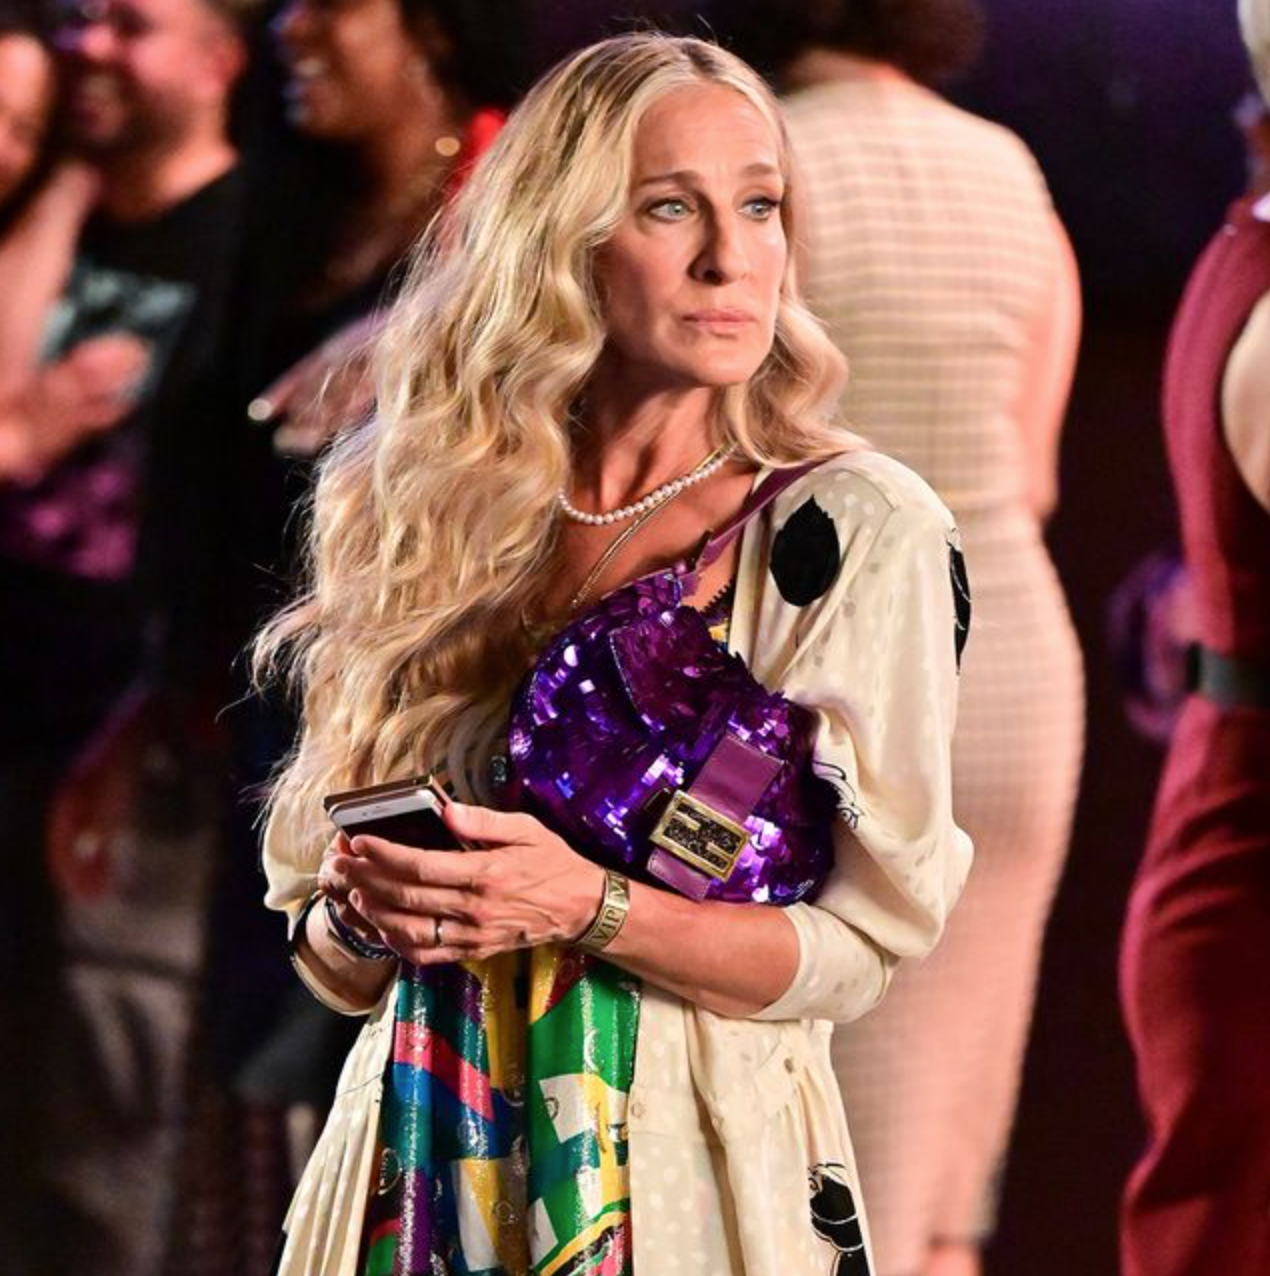 Carrie's Look Has Evolved Now She's In Her Fifties—But She's Still Carrying  the Fendi Baguette